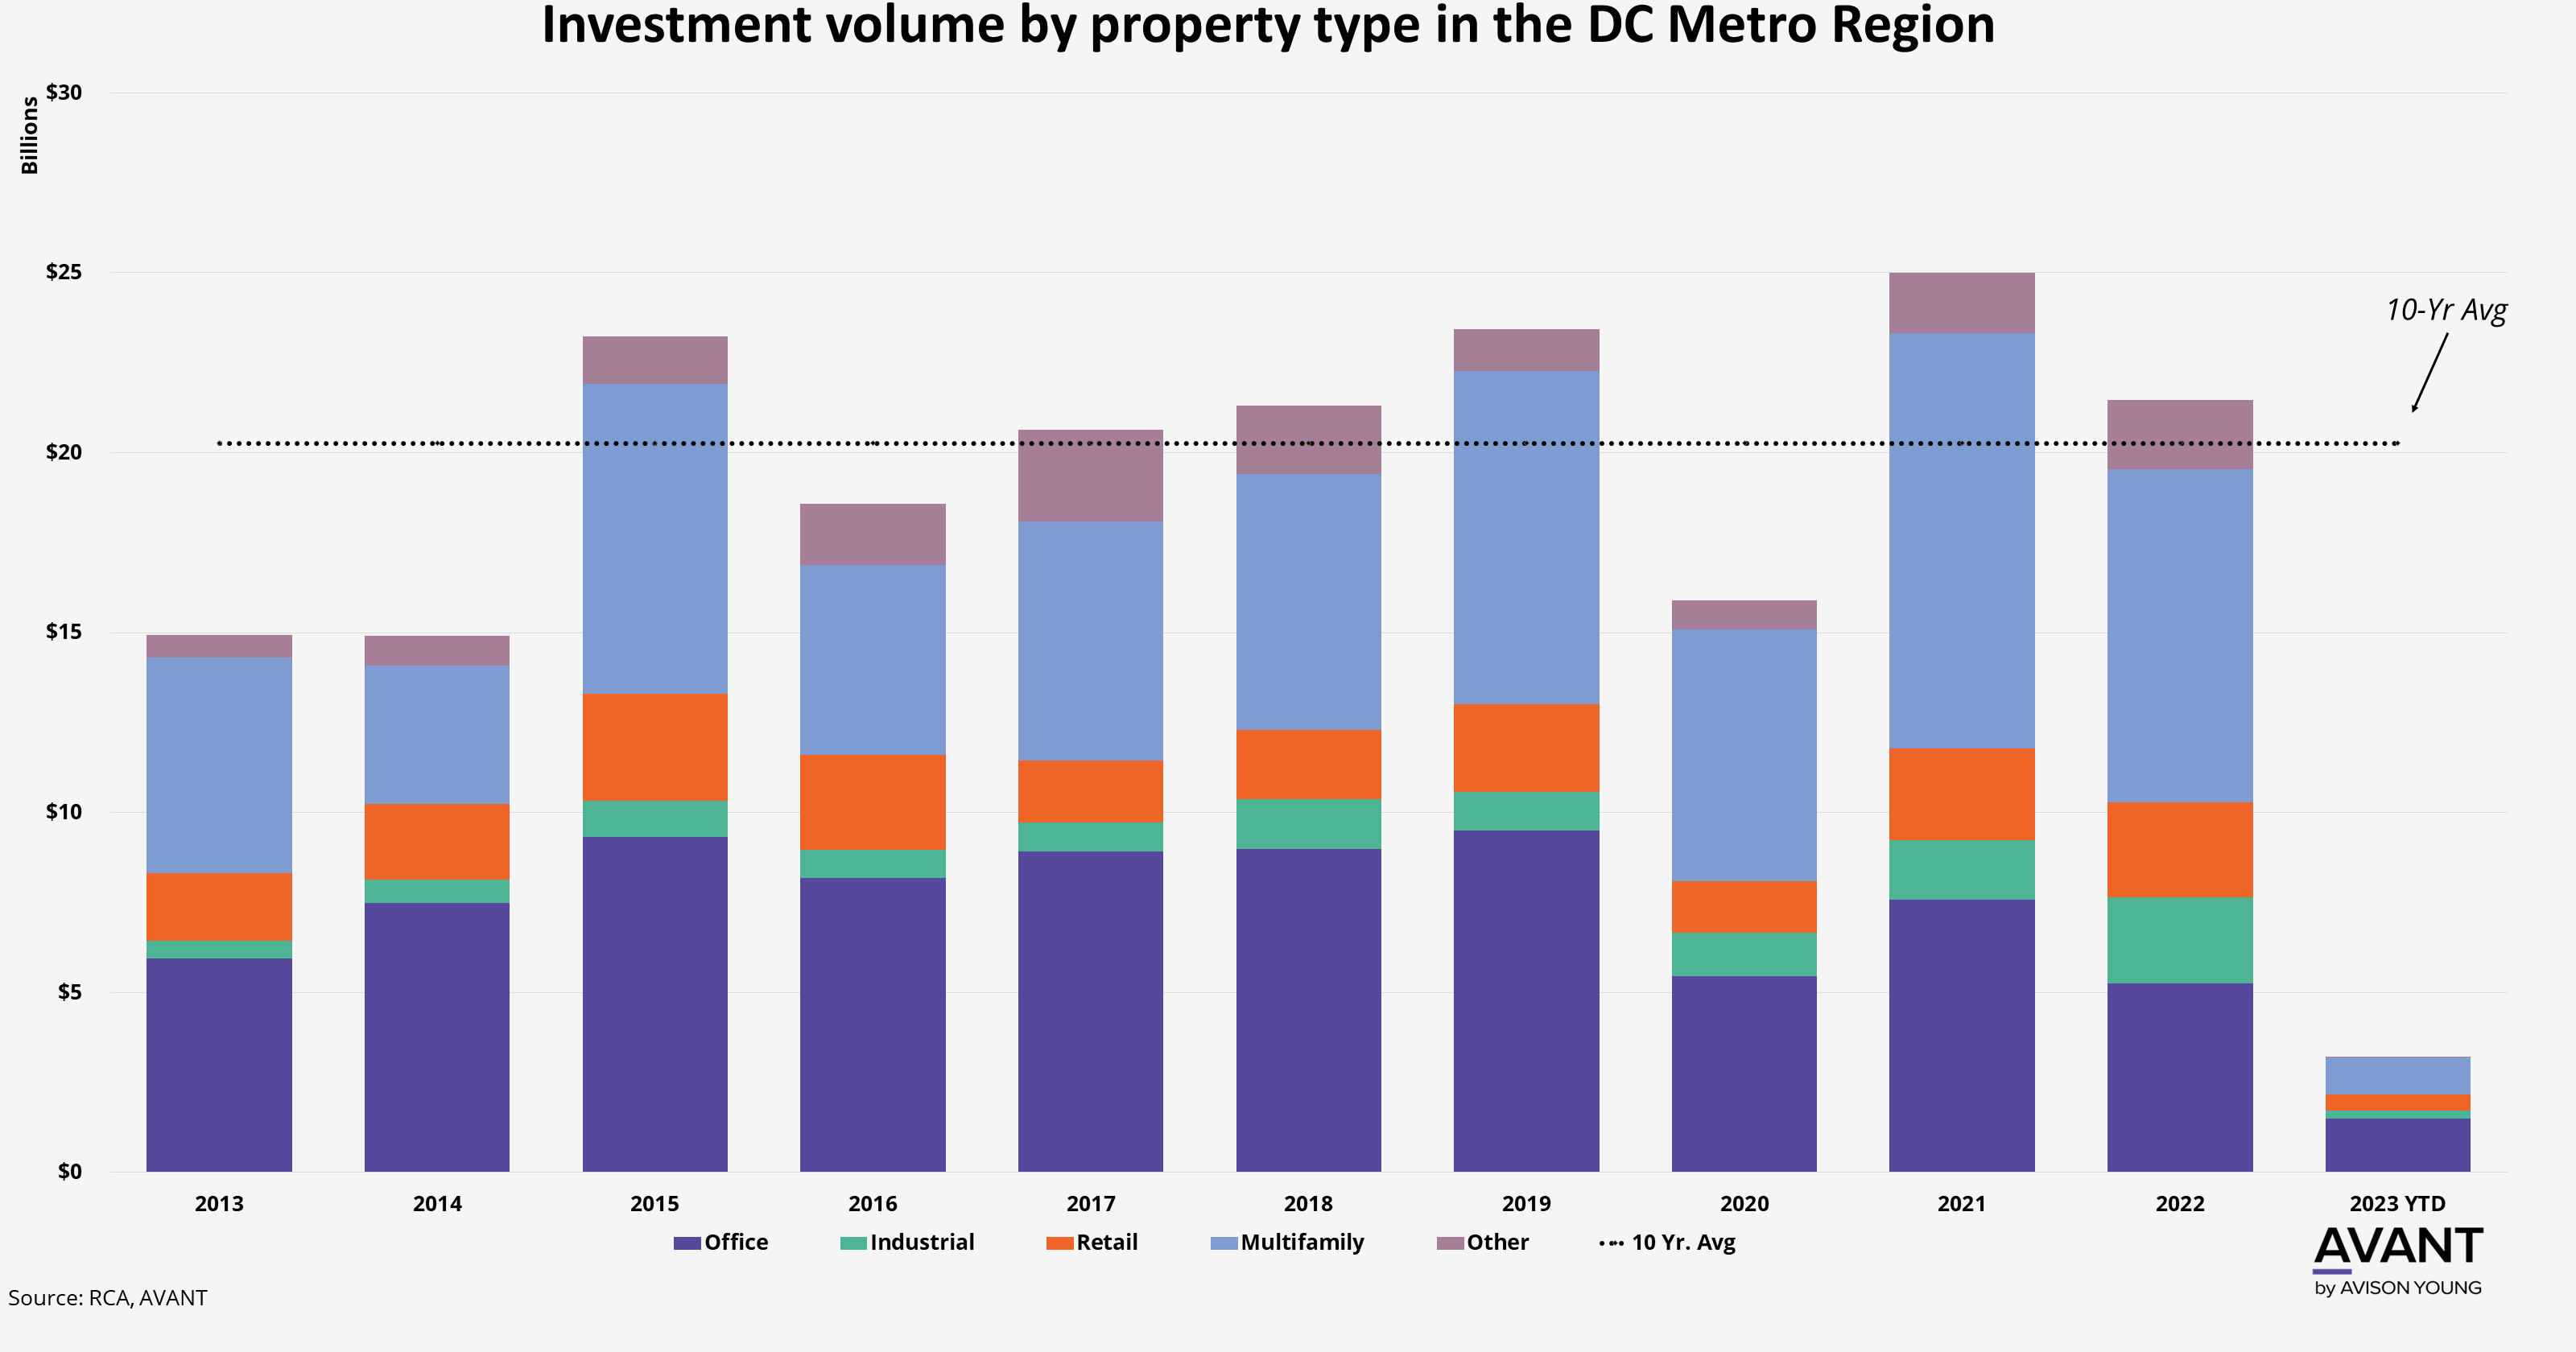 The dance of dollars: Exploring investment volume by property type in the DC Metro Region